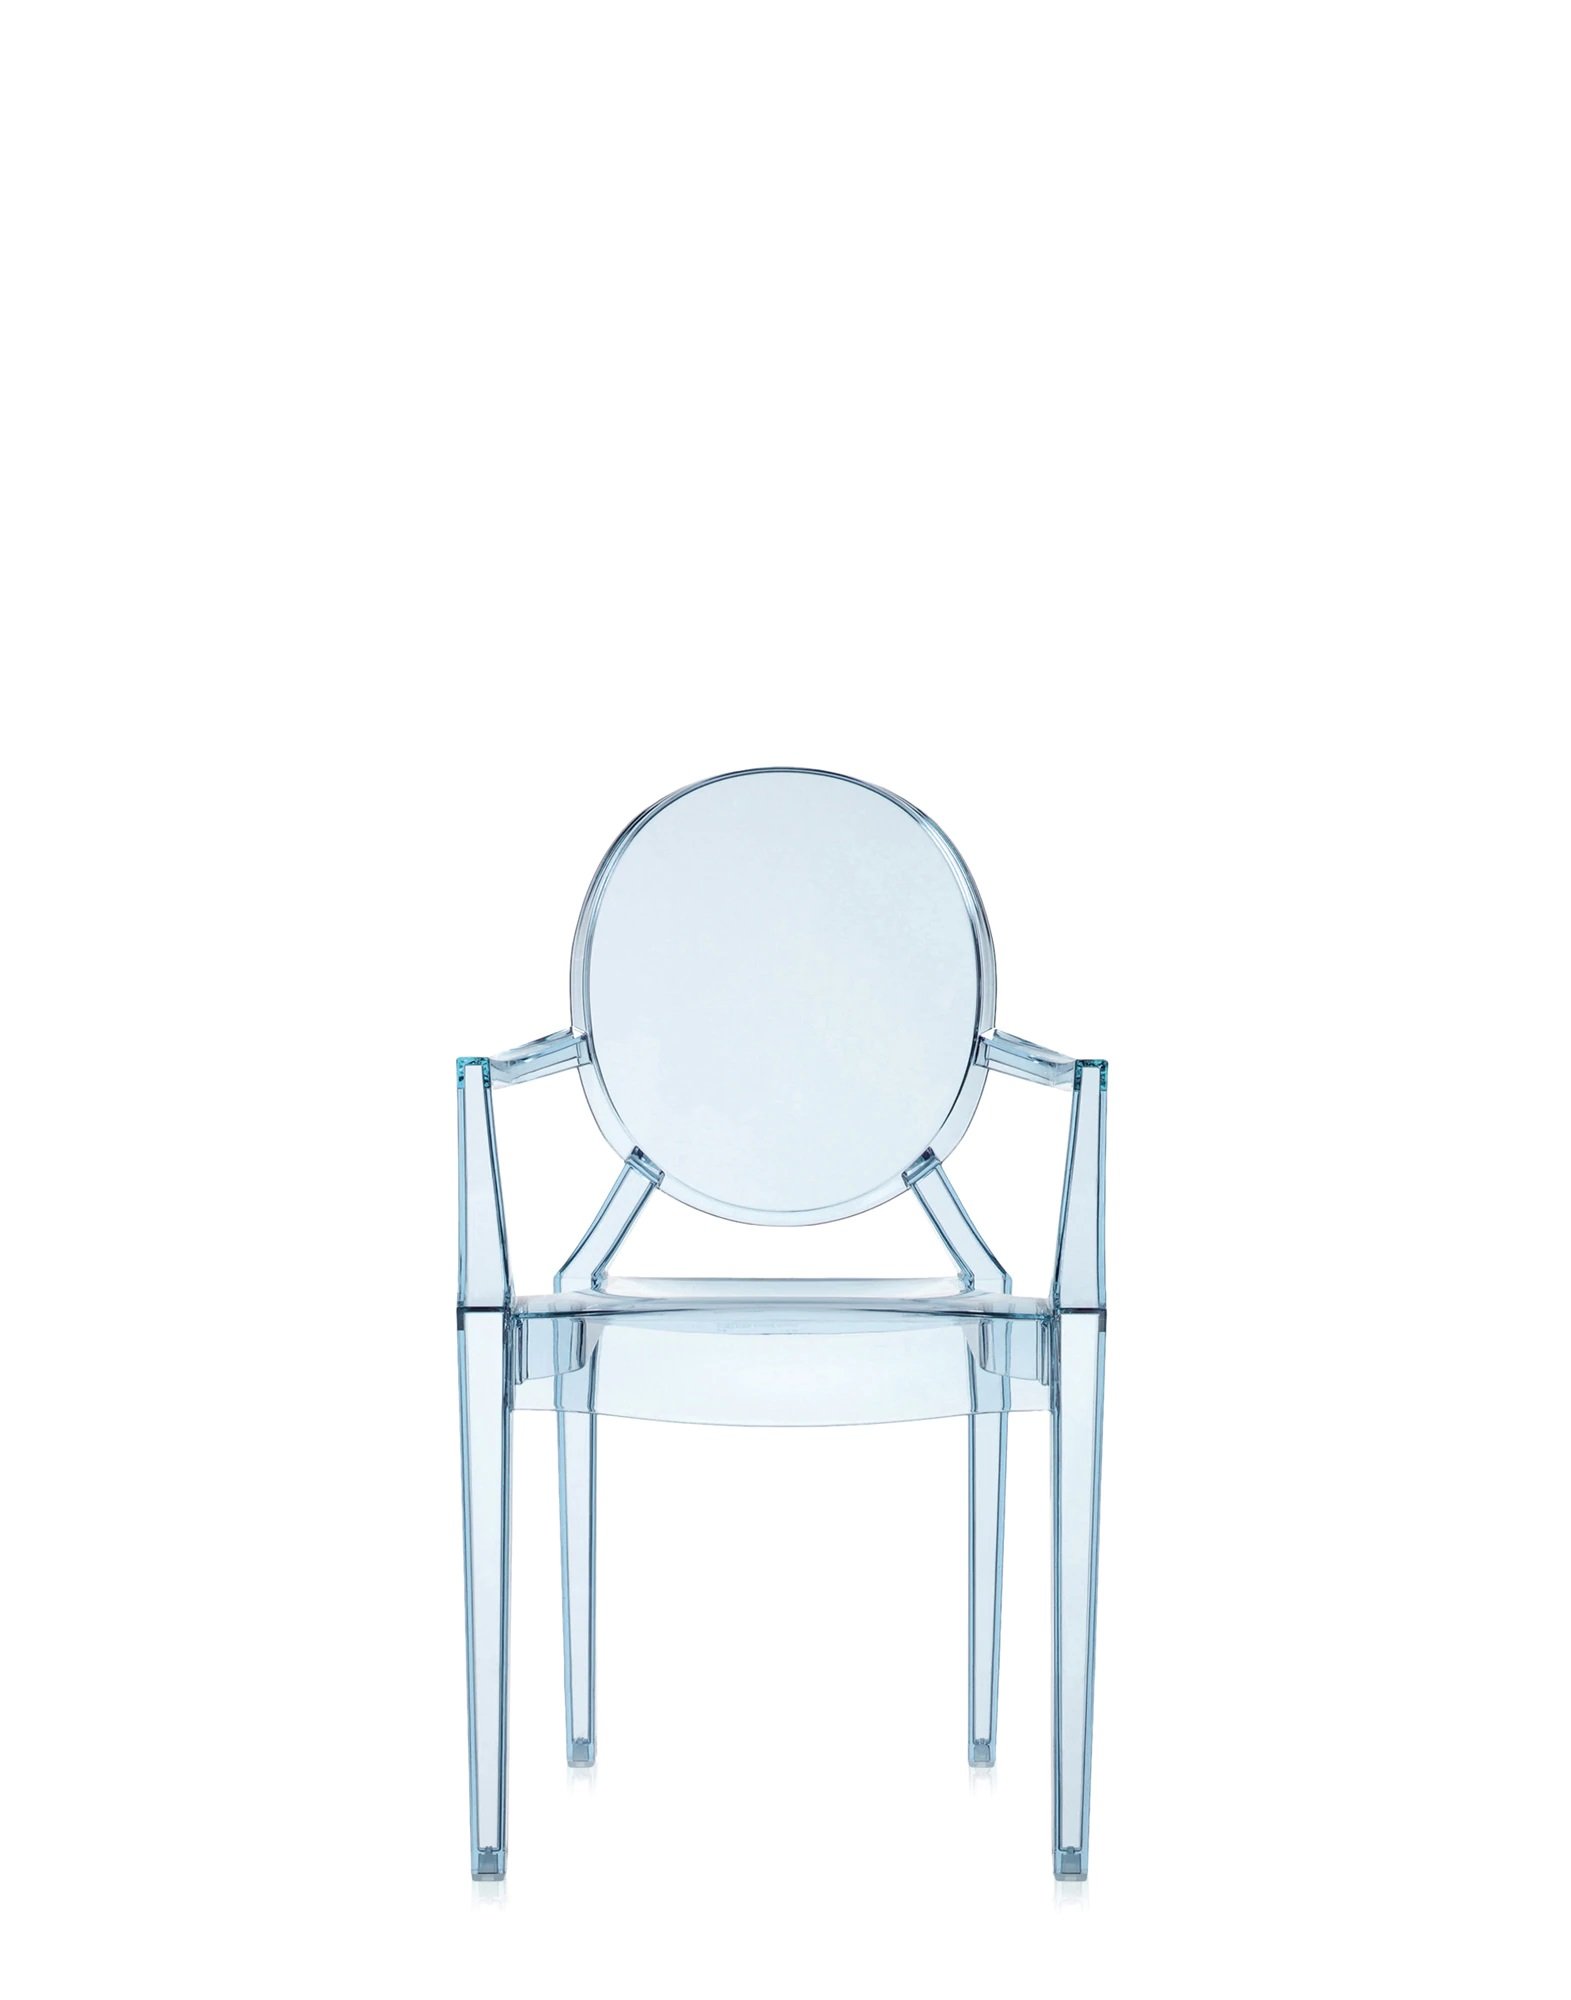 Lou Lou Ghost Kids Chair from Kartell, designed by Philippe Starck